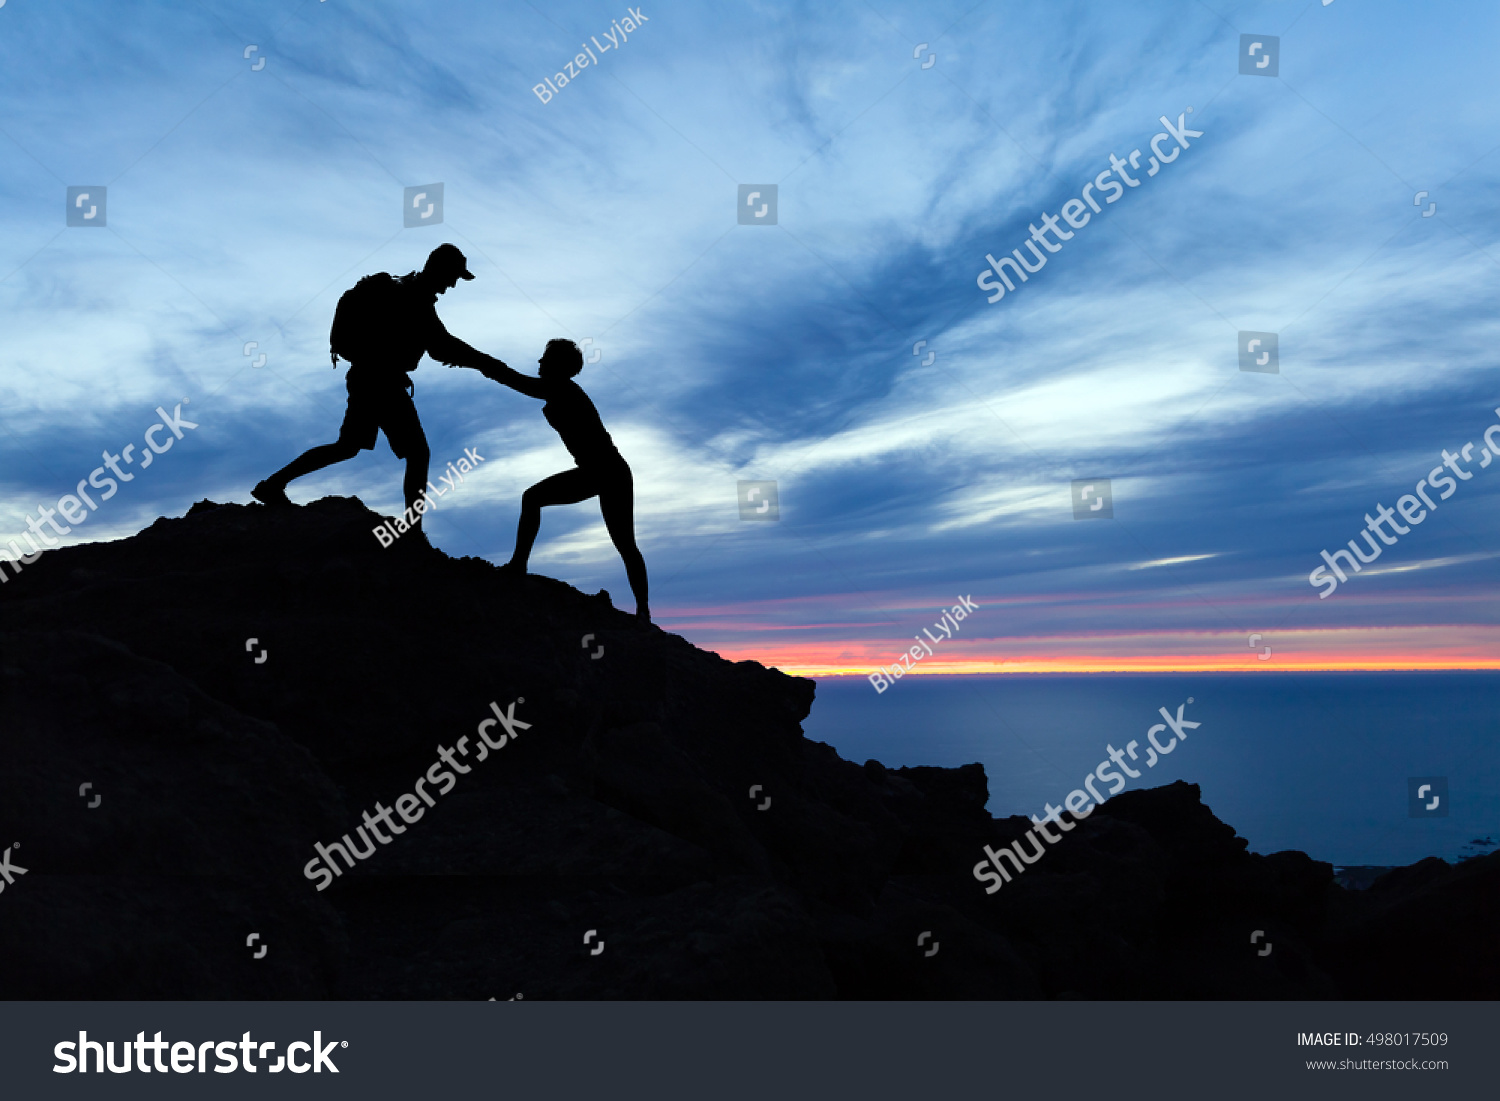 Teamwork couple hiking, help each other, trust assistance and silhouette in mountains, sunset over ocean. Team of climbers man and woman helping hand on mountain top, inspirational climbing team. #498017509